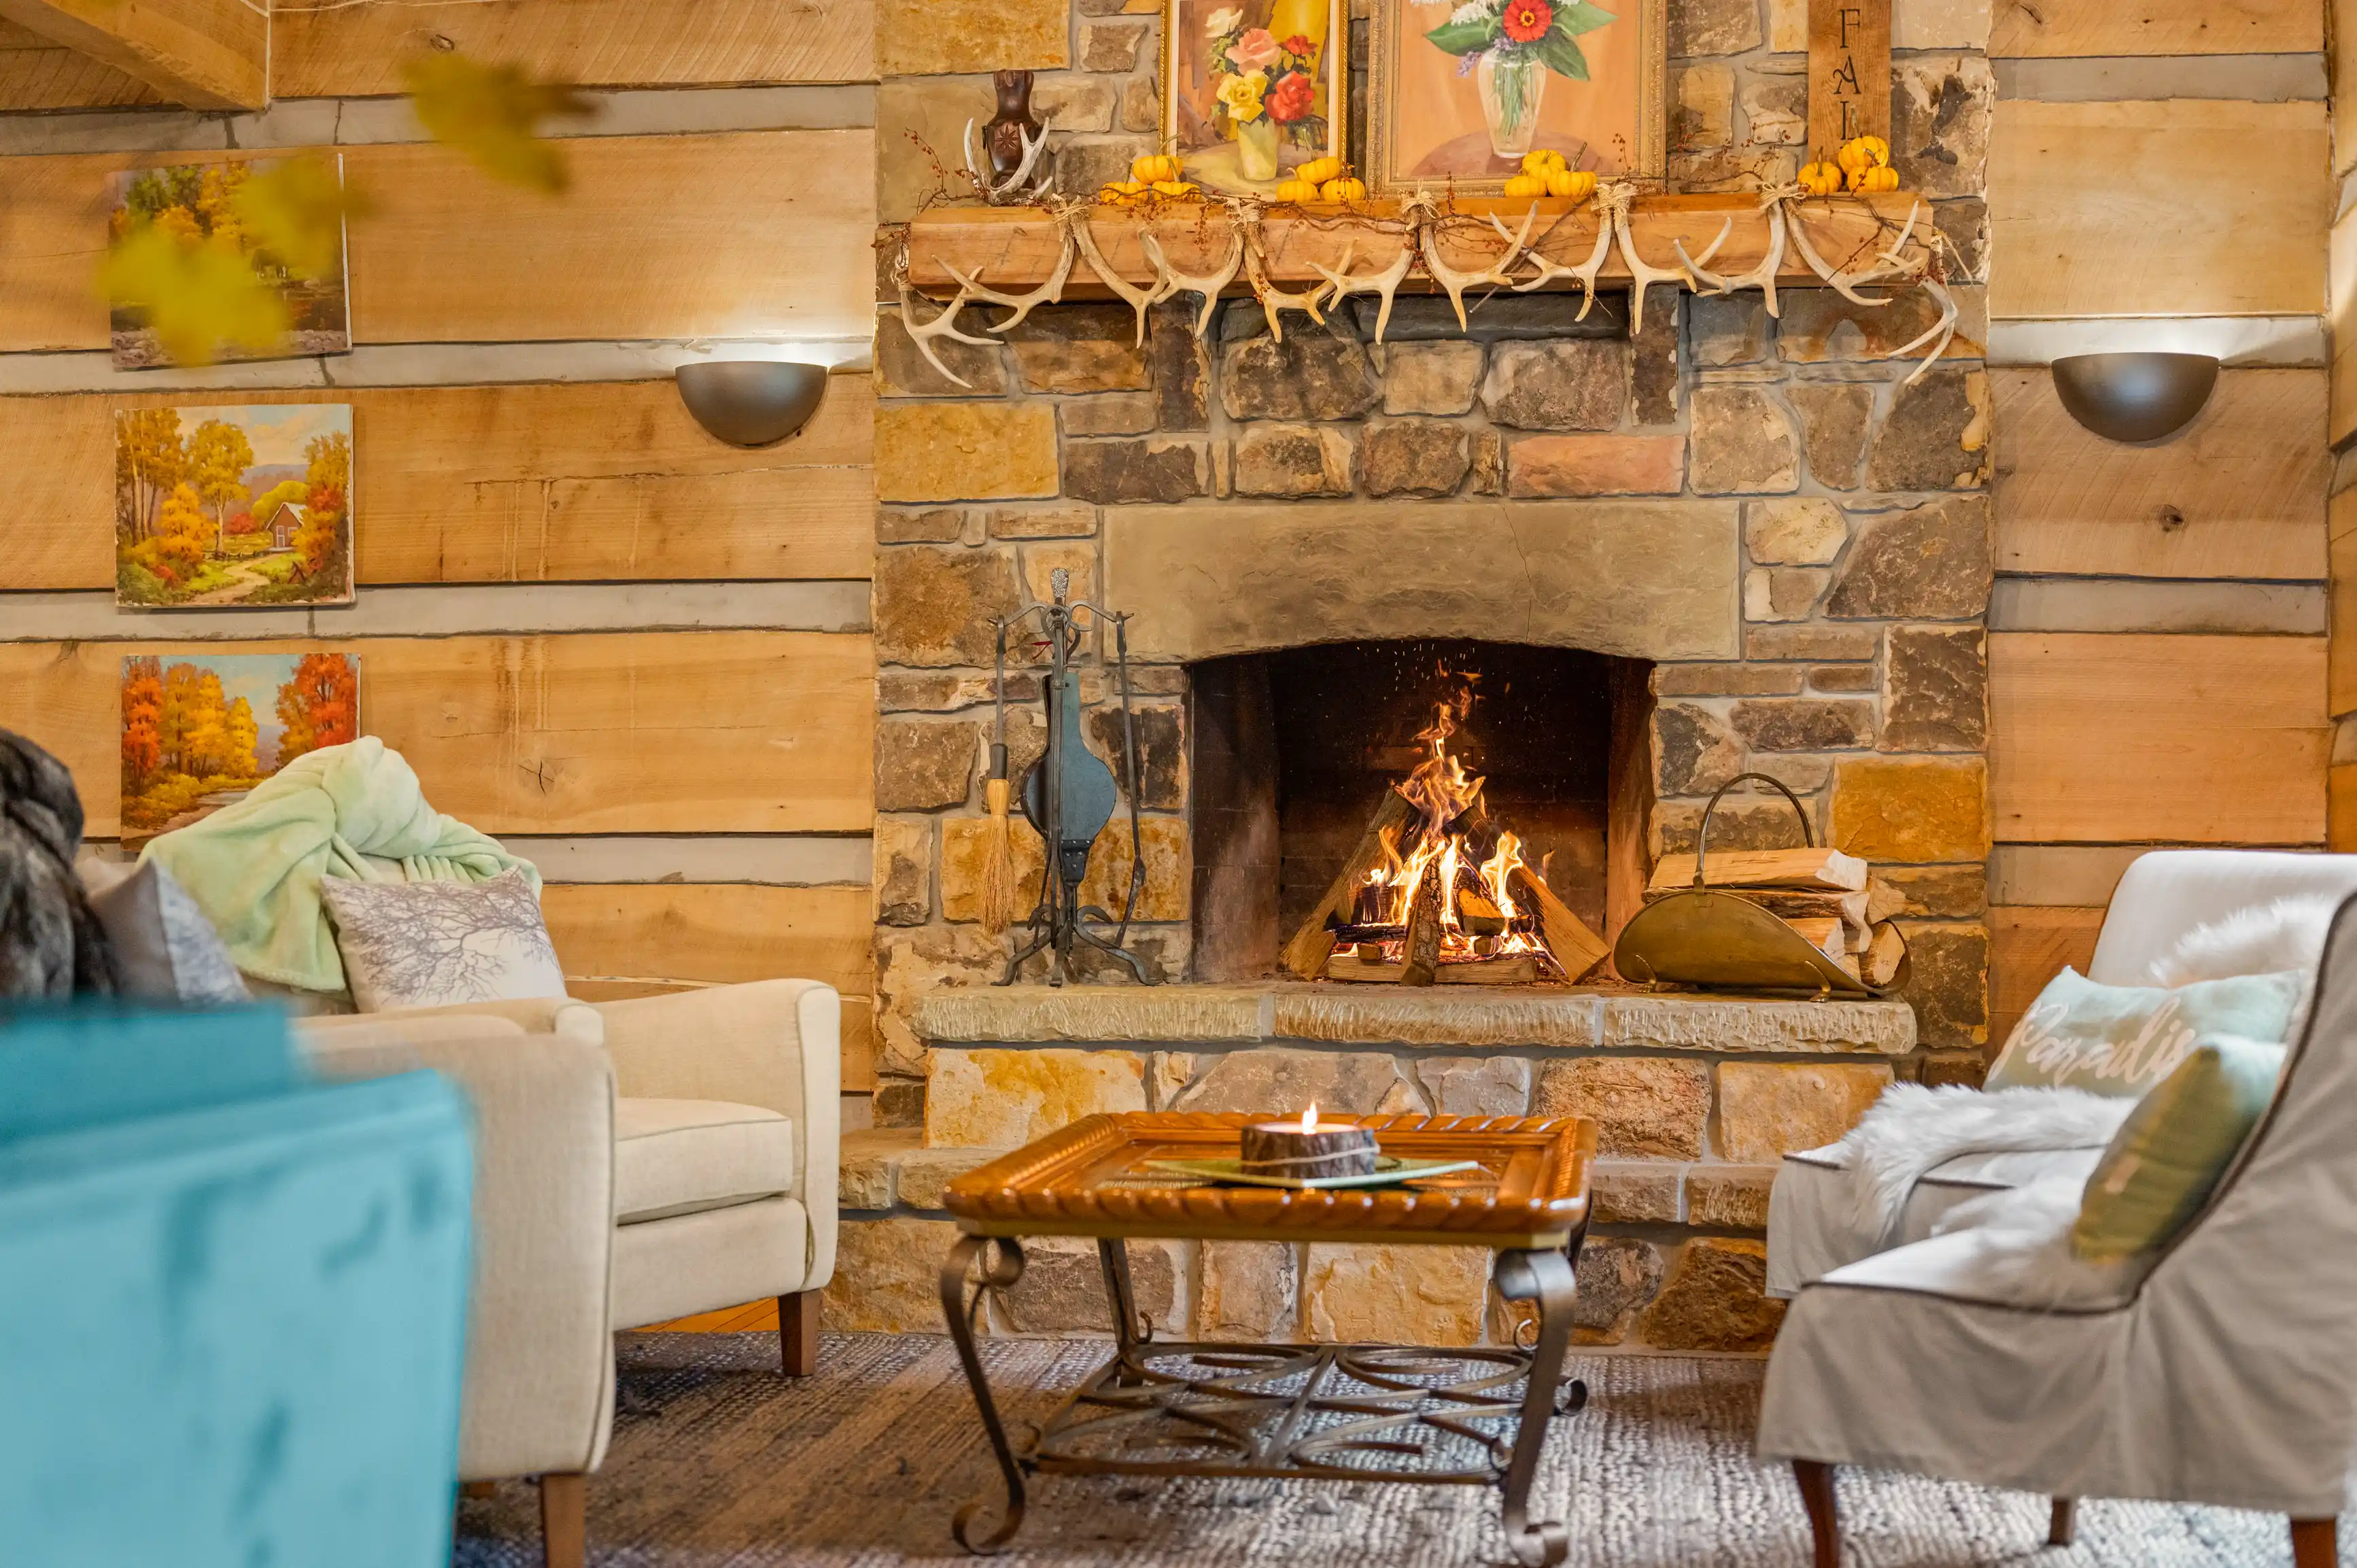 Cozy cabin interior with a lit fireplace, stone surround, wooden walls, framed autumn landscape paintings, decorative antlers, and comfortable seating area with a small wooden table.